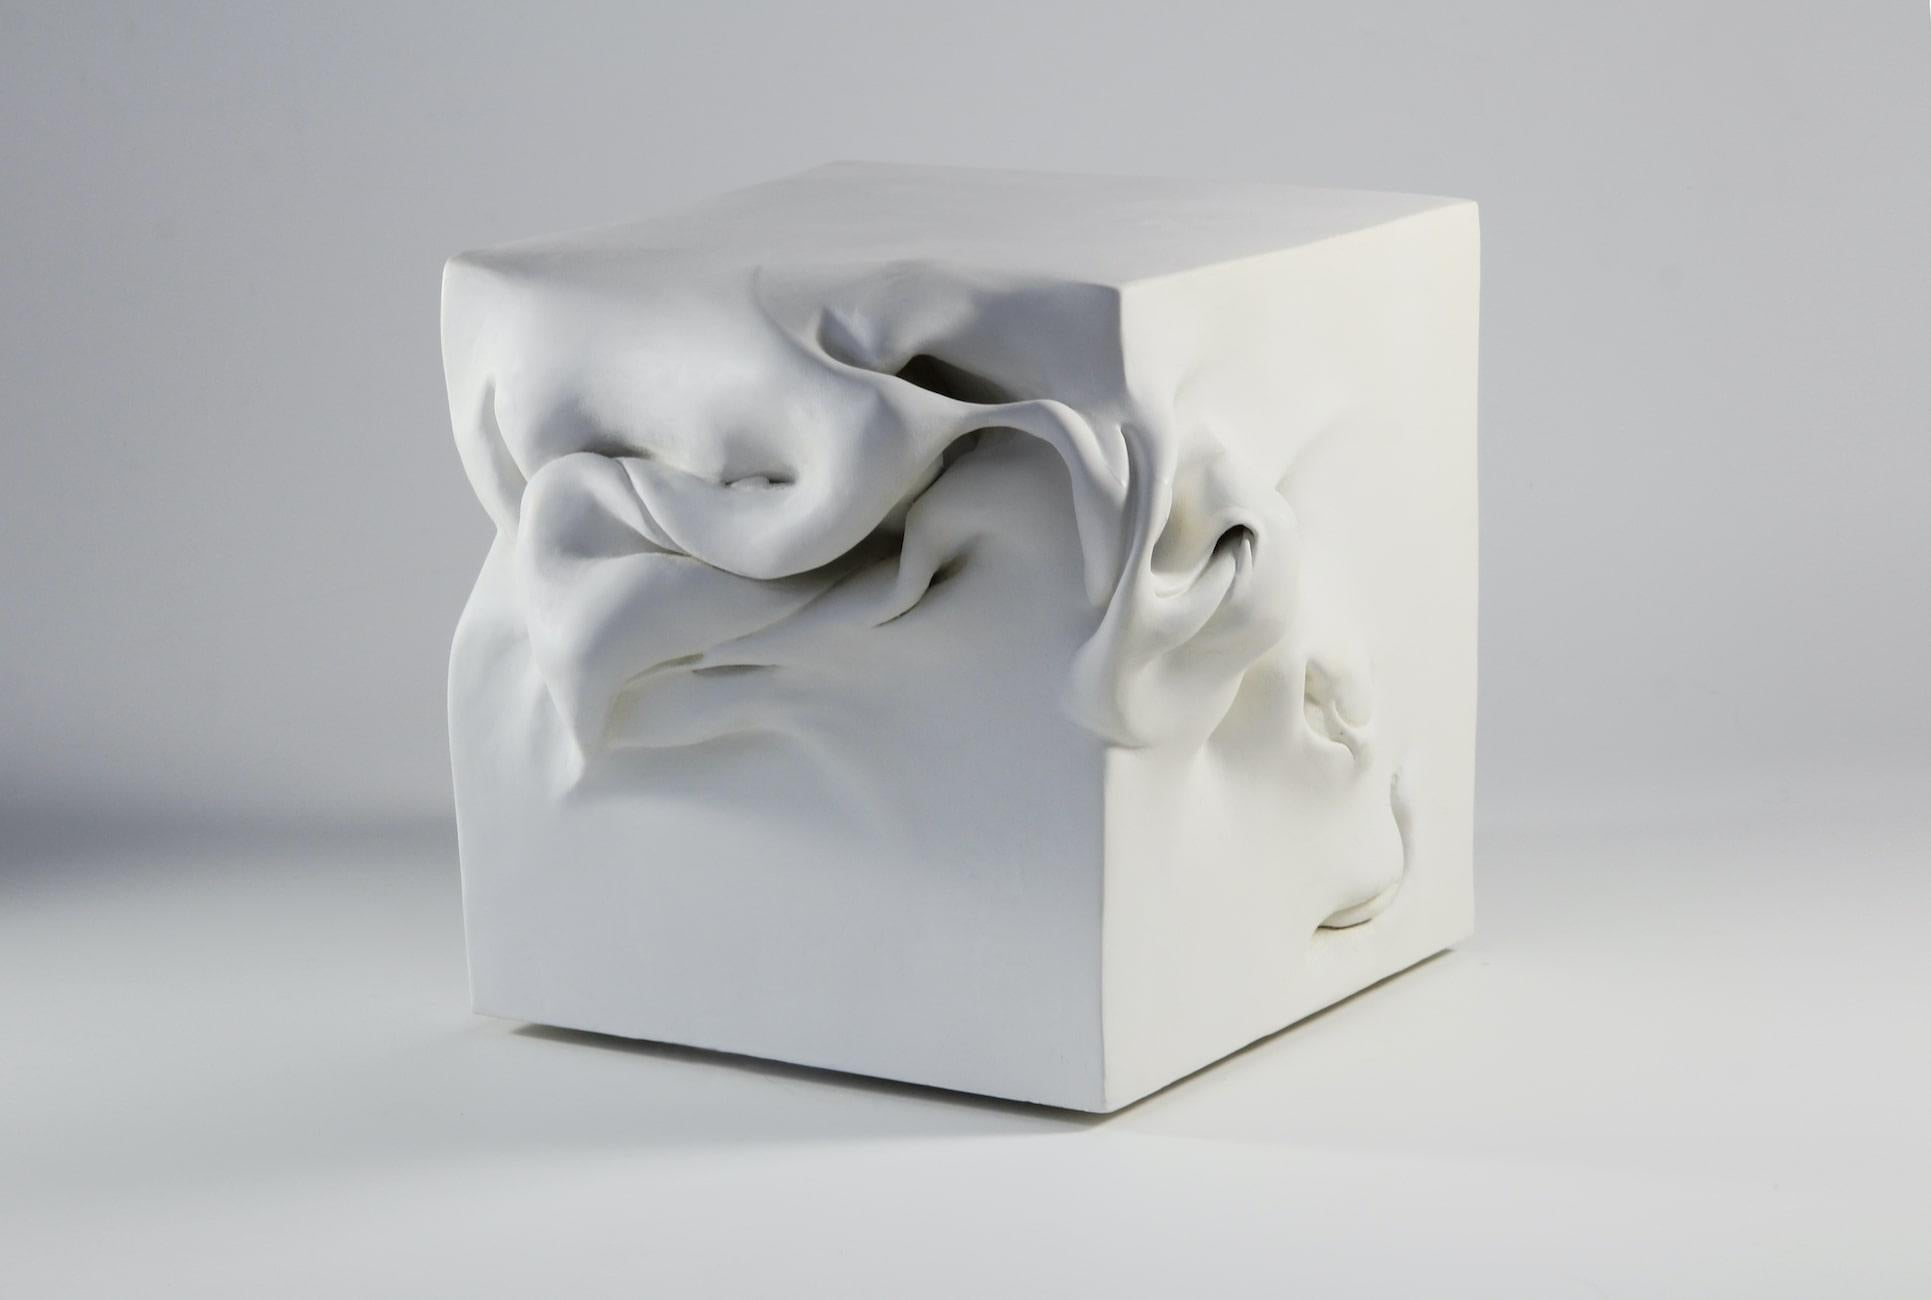 Cube 3 is a unique painted fired clay sculpture by contemporary artist Sharon Brill, dimensions are 19 × 23 × 23 cm (7.5 × 9.1 × 9.1 in). 
This sculpture is a unique piece signed by the artist, and comes with a certificate of authenticity. 

Sharon